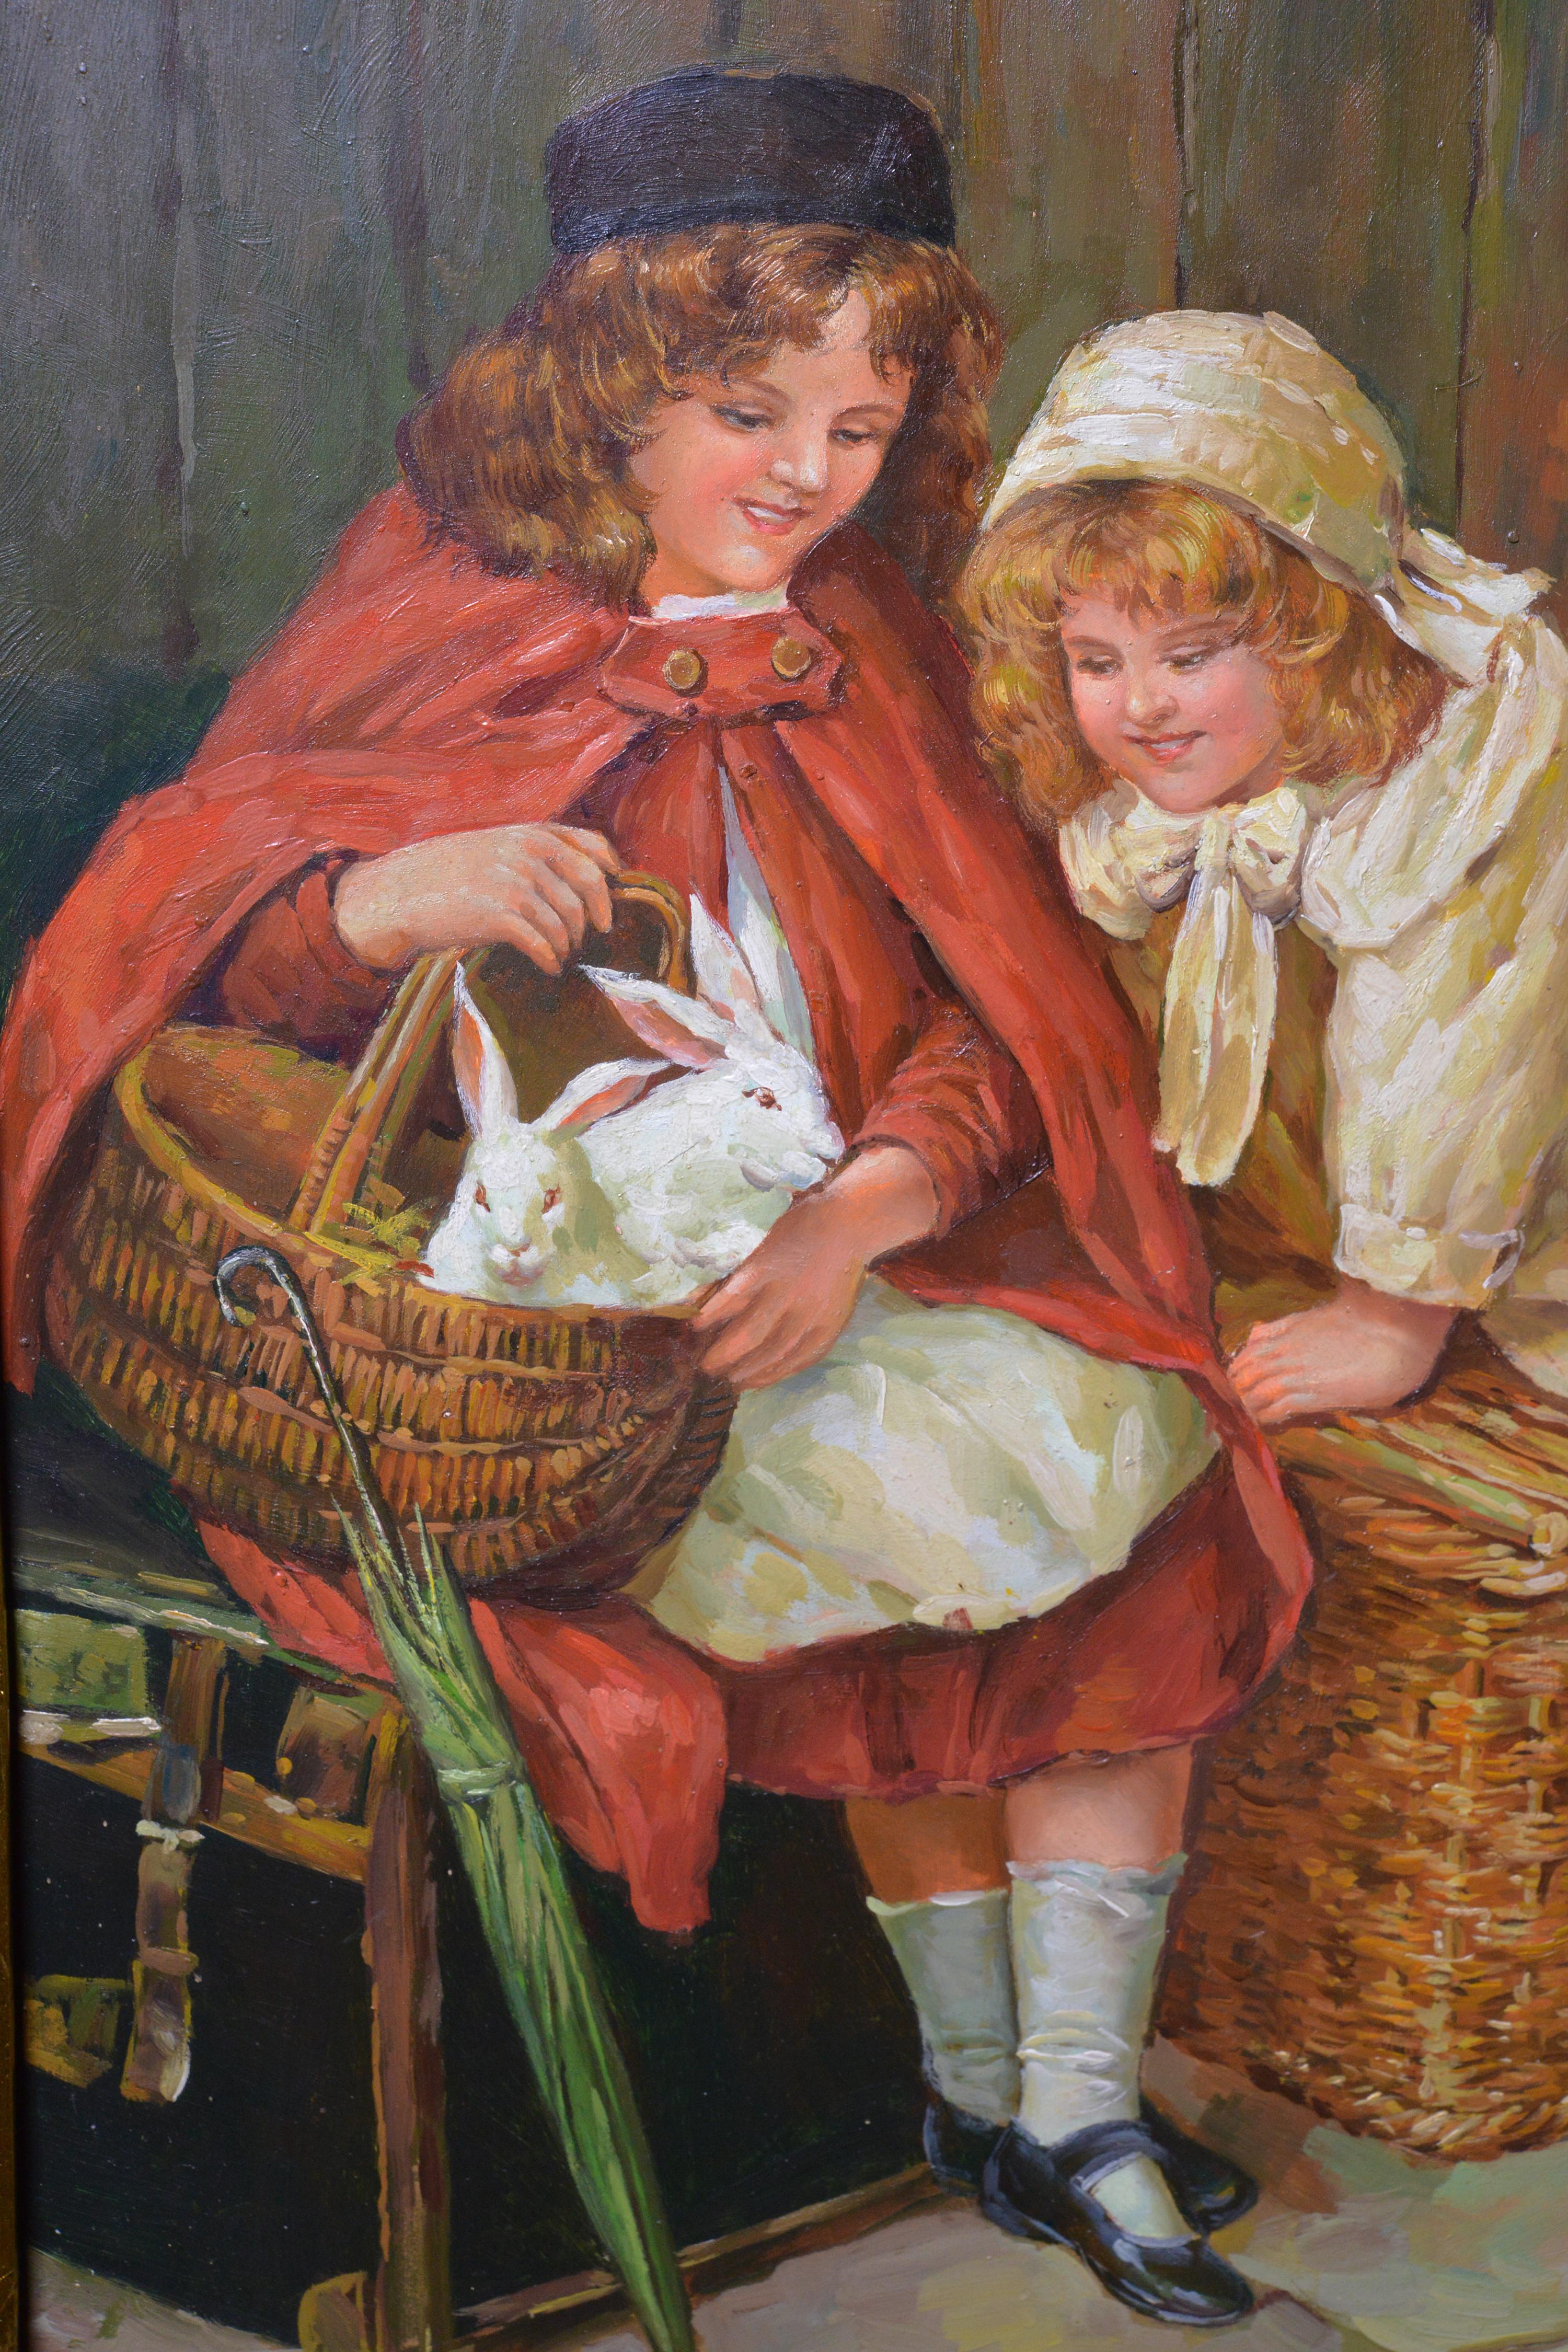 Very touching scene with two little girls. Two sisters are thrilled to meet their new pets that their parents have bought. The sincerity and immediacy of children's feelings depicted in this painting evoke the most positive emotions... Work by an